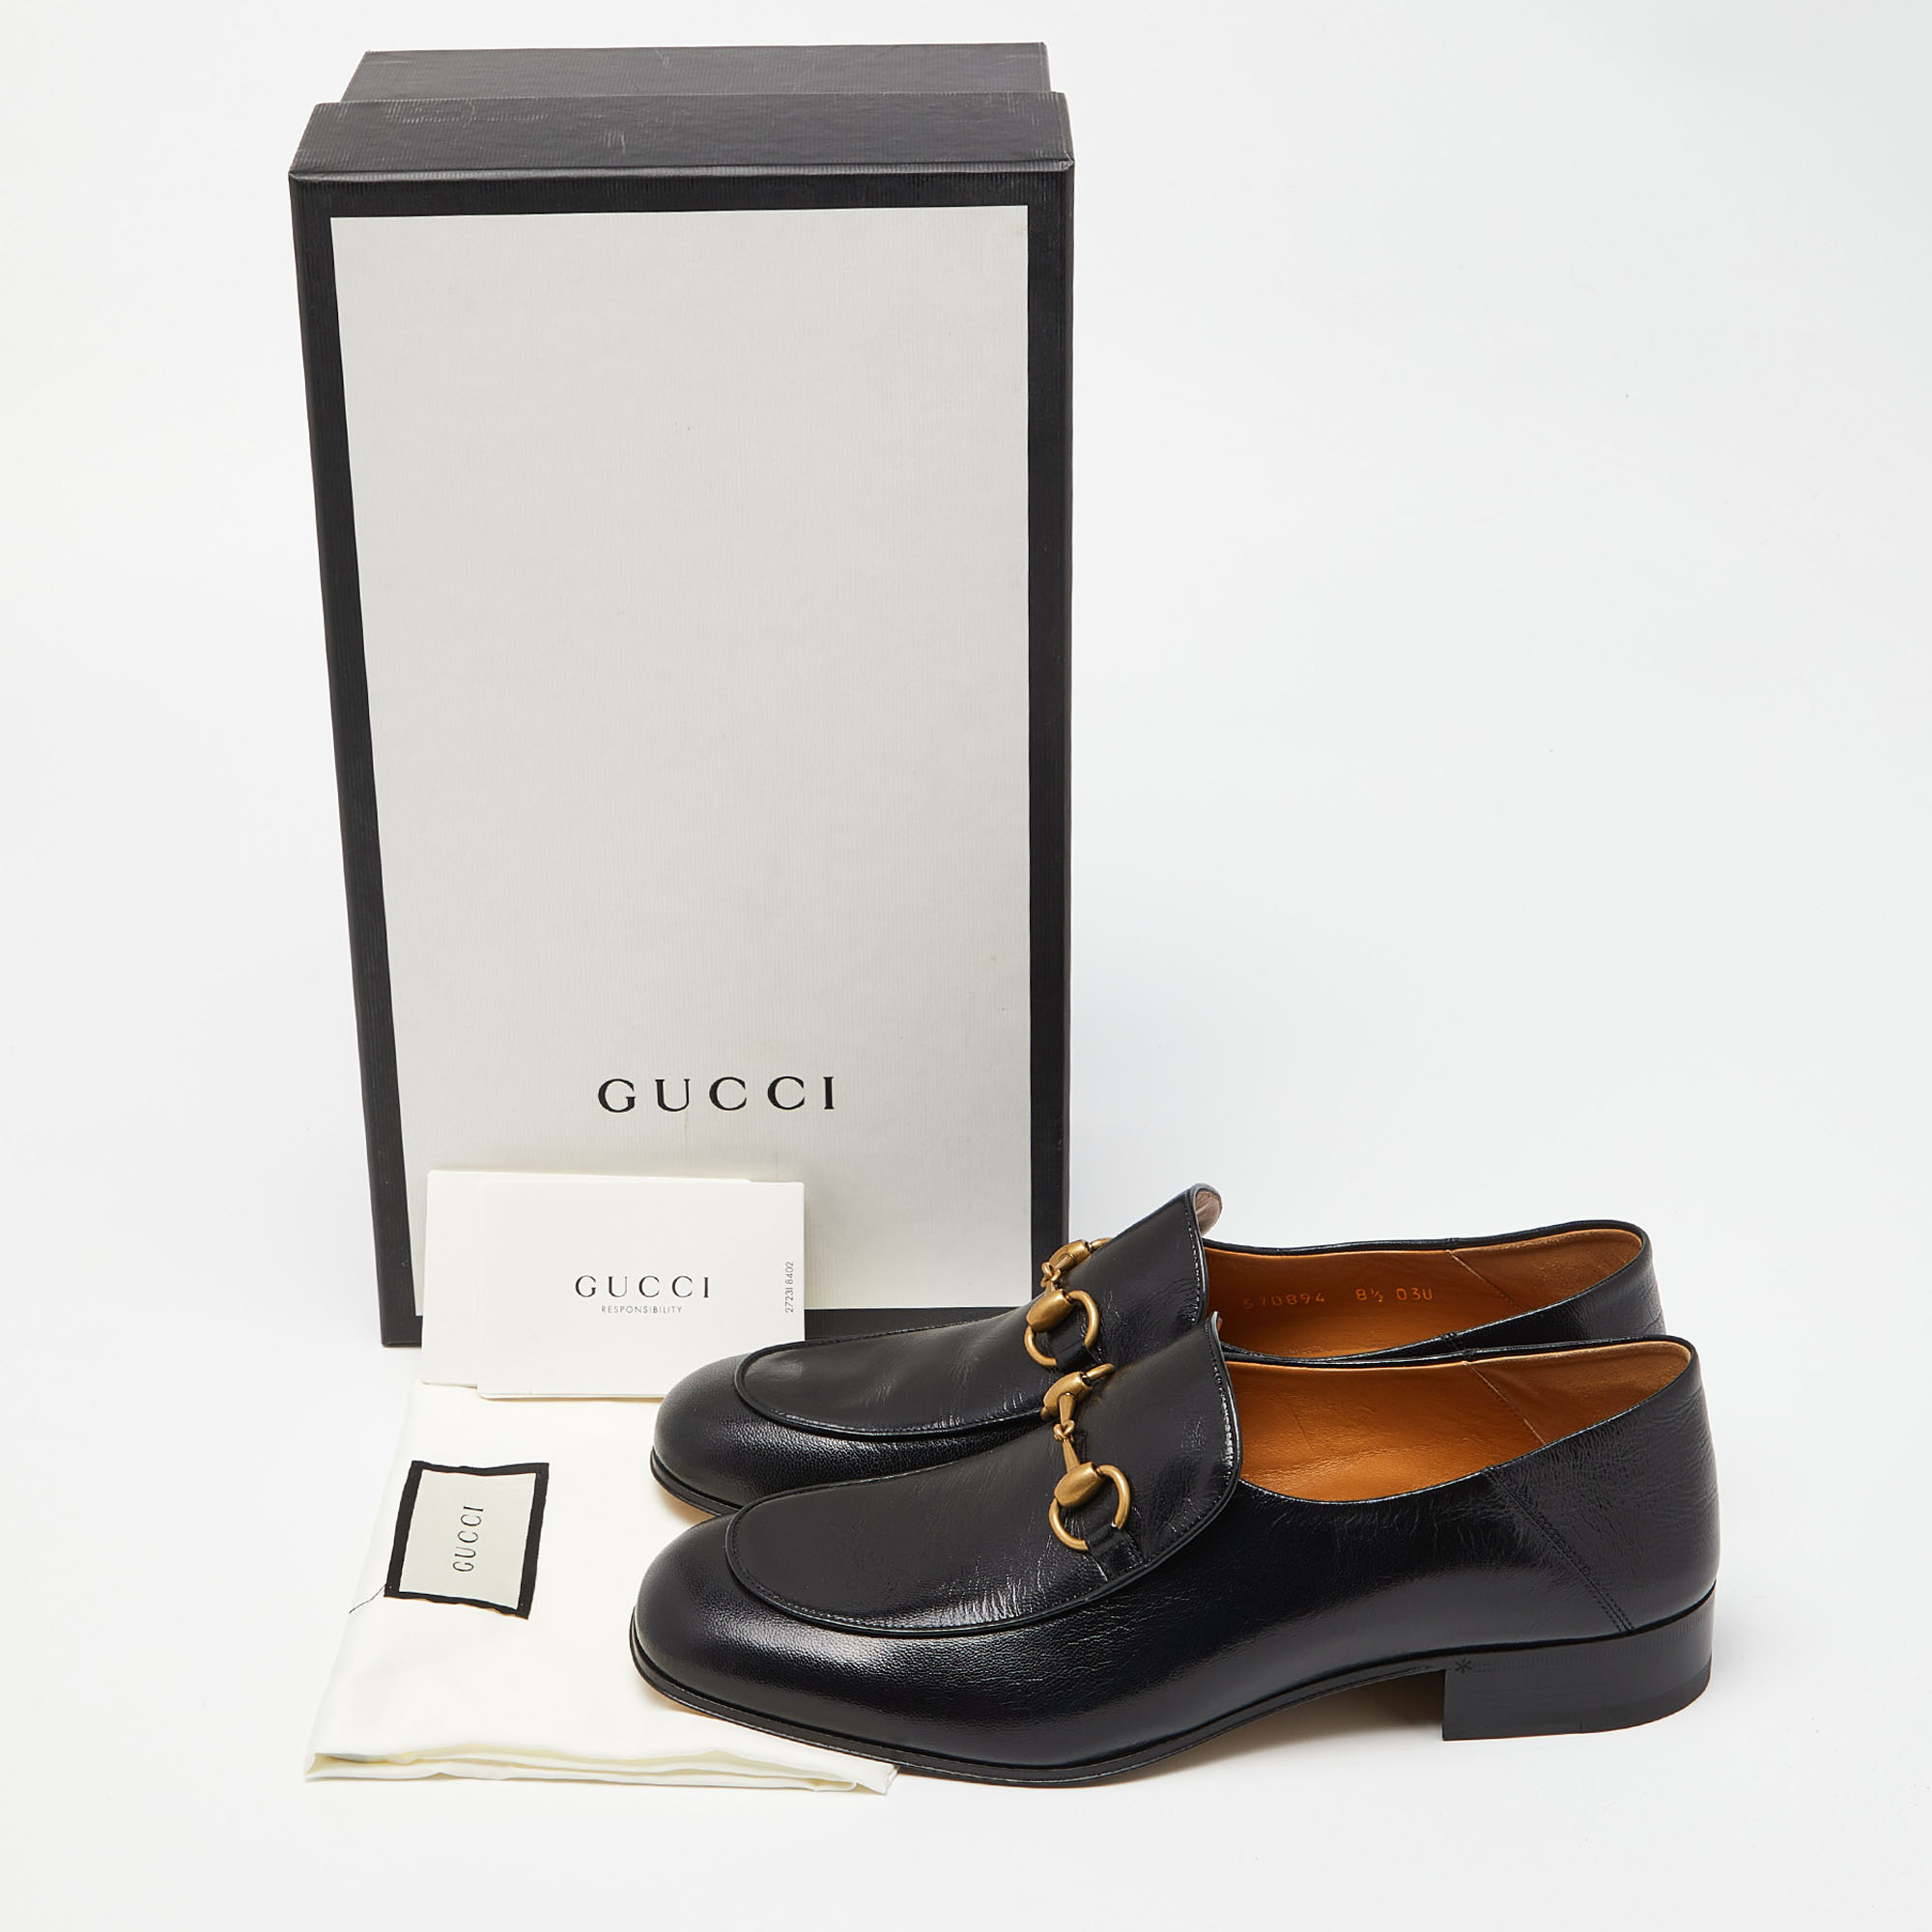 Gucci Black Leather Horsebit Loafers Size 42.5